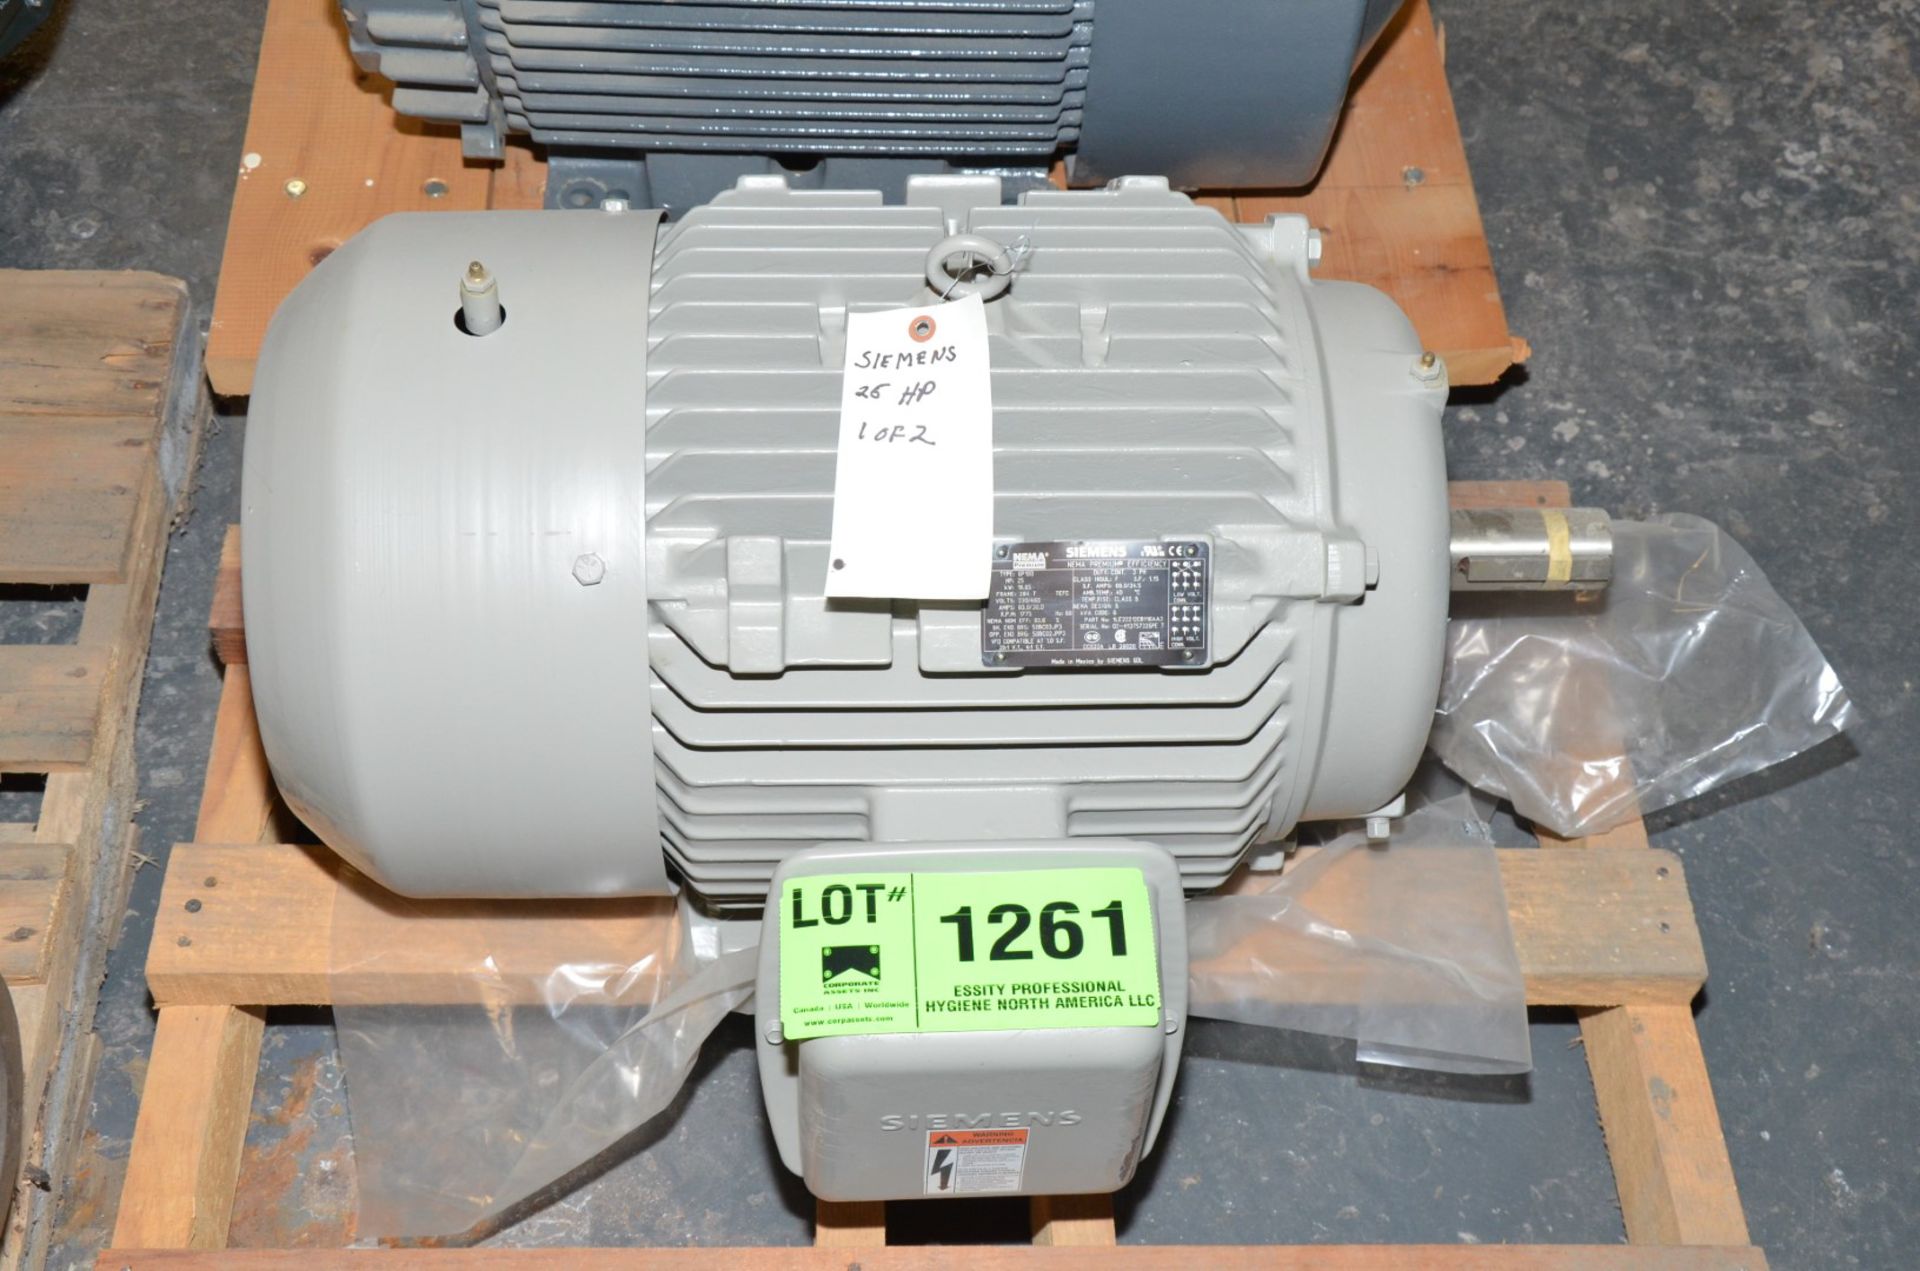 SIEMENS 25HP 460V 1775 RPM ELECTRIC MOTOR [RIGGING FEE FOR LOT #1261 - $25 USD PLUS APPLICABLE